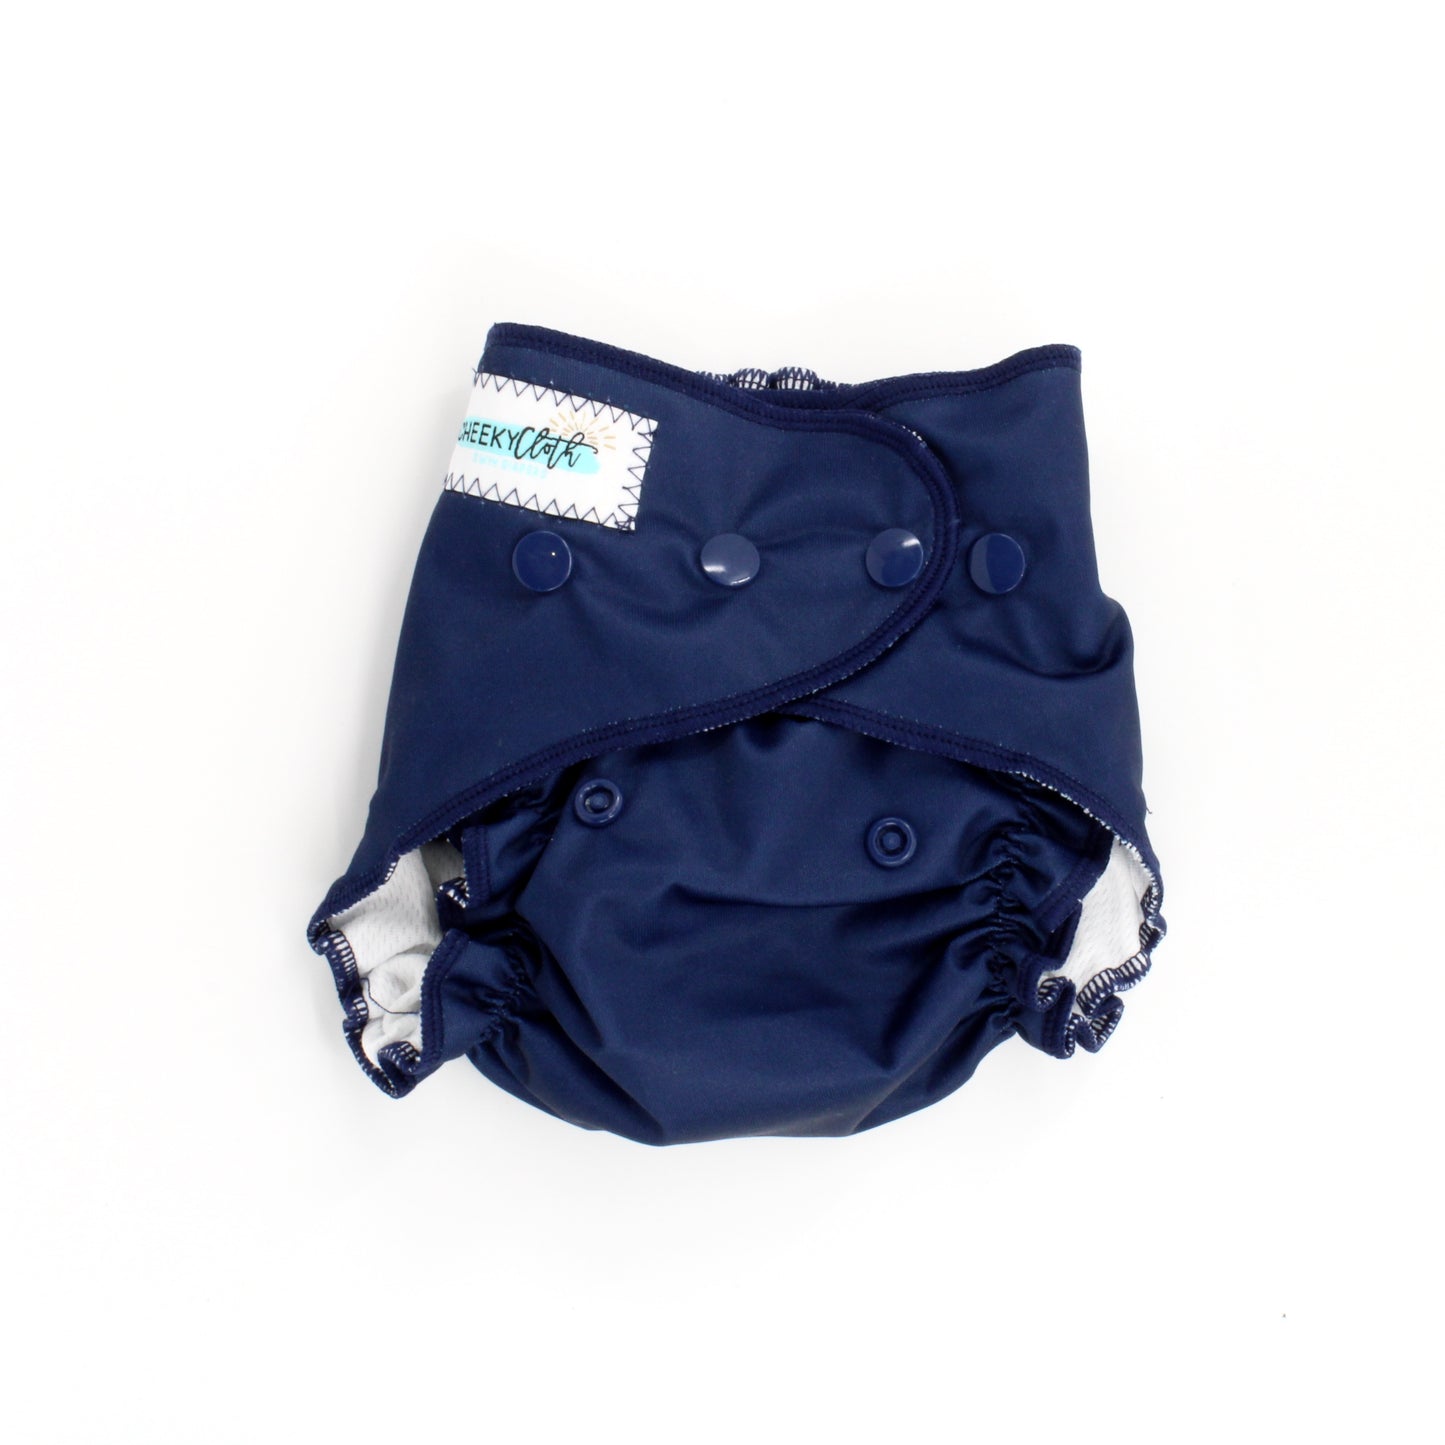 Cheeky Cloth One Size Reusable Swim Diaper "Navy"